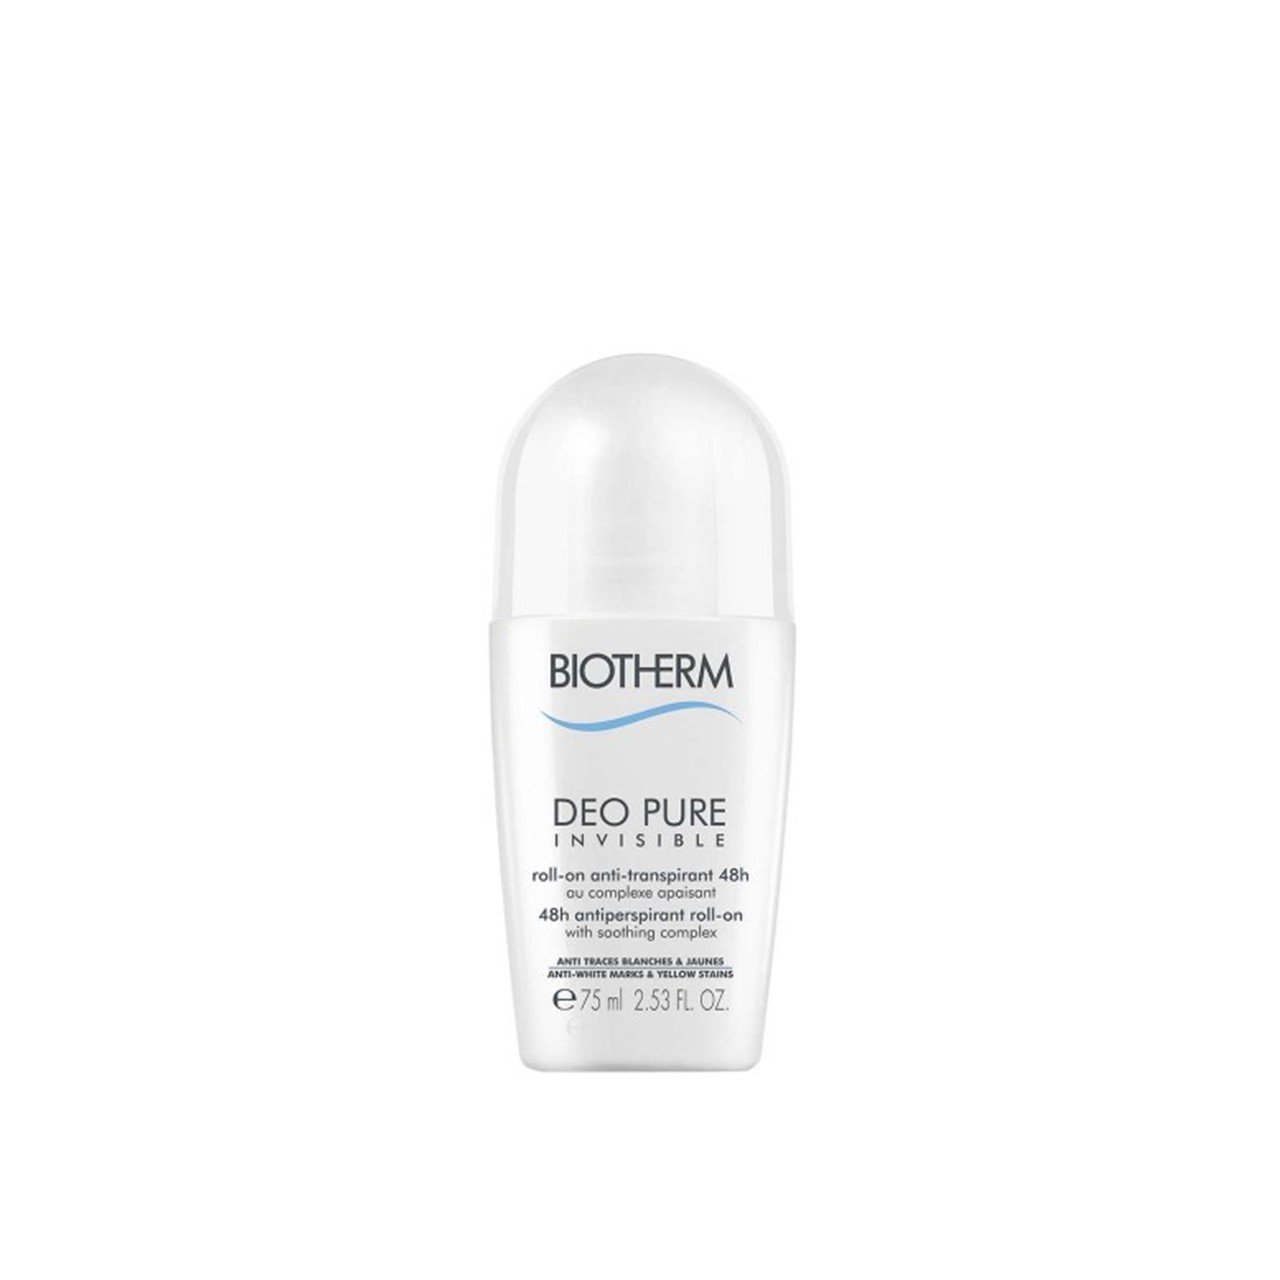 Buy Biotherm Deo Invisible 48h Antiperspirant Roll-On 75ml (2.54fl oz) · USA